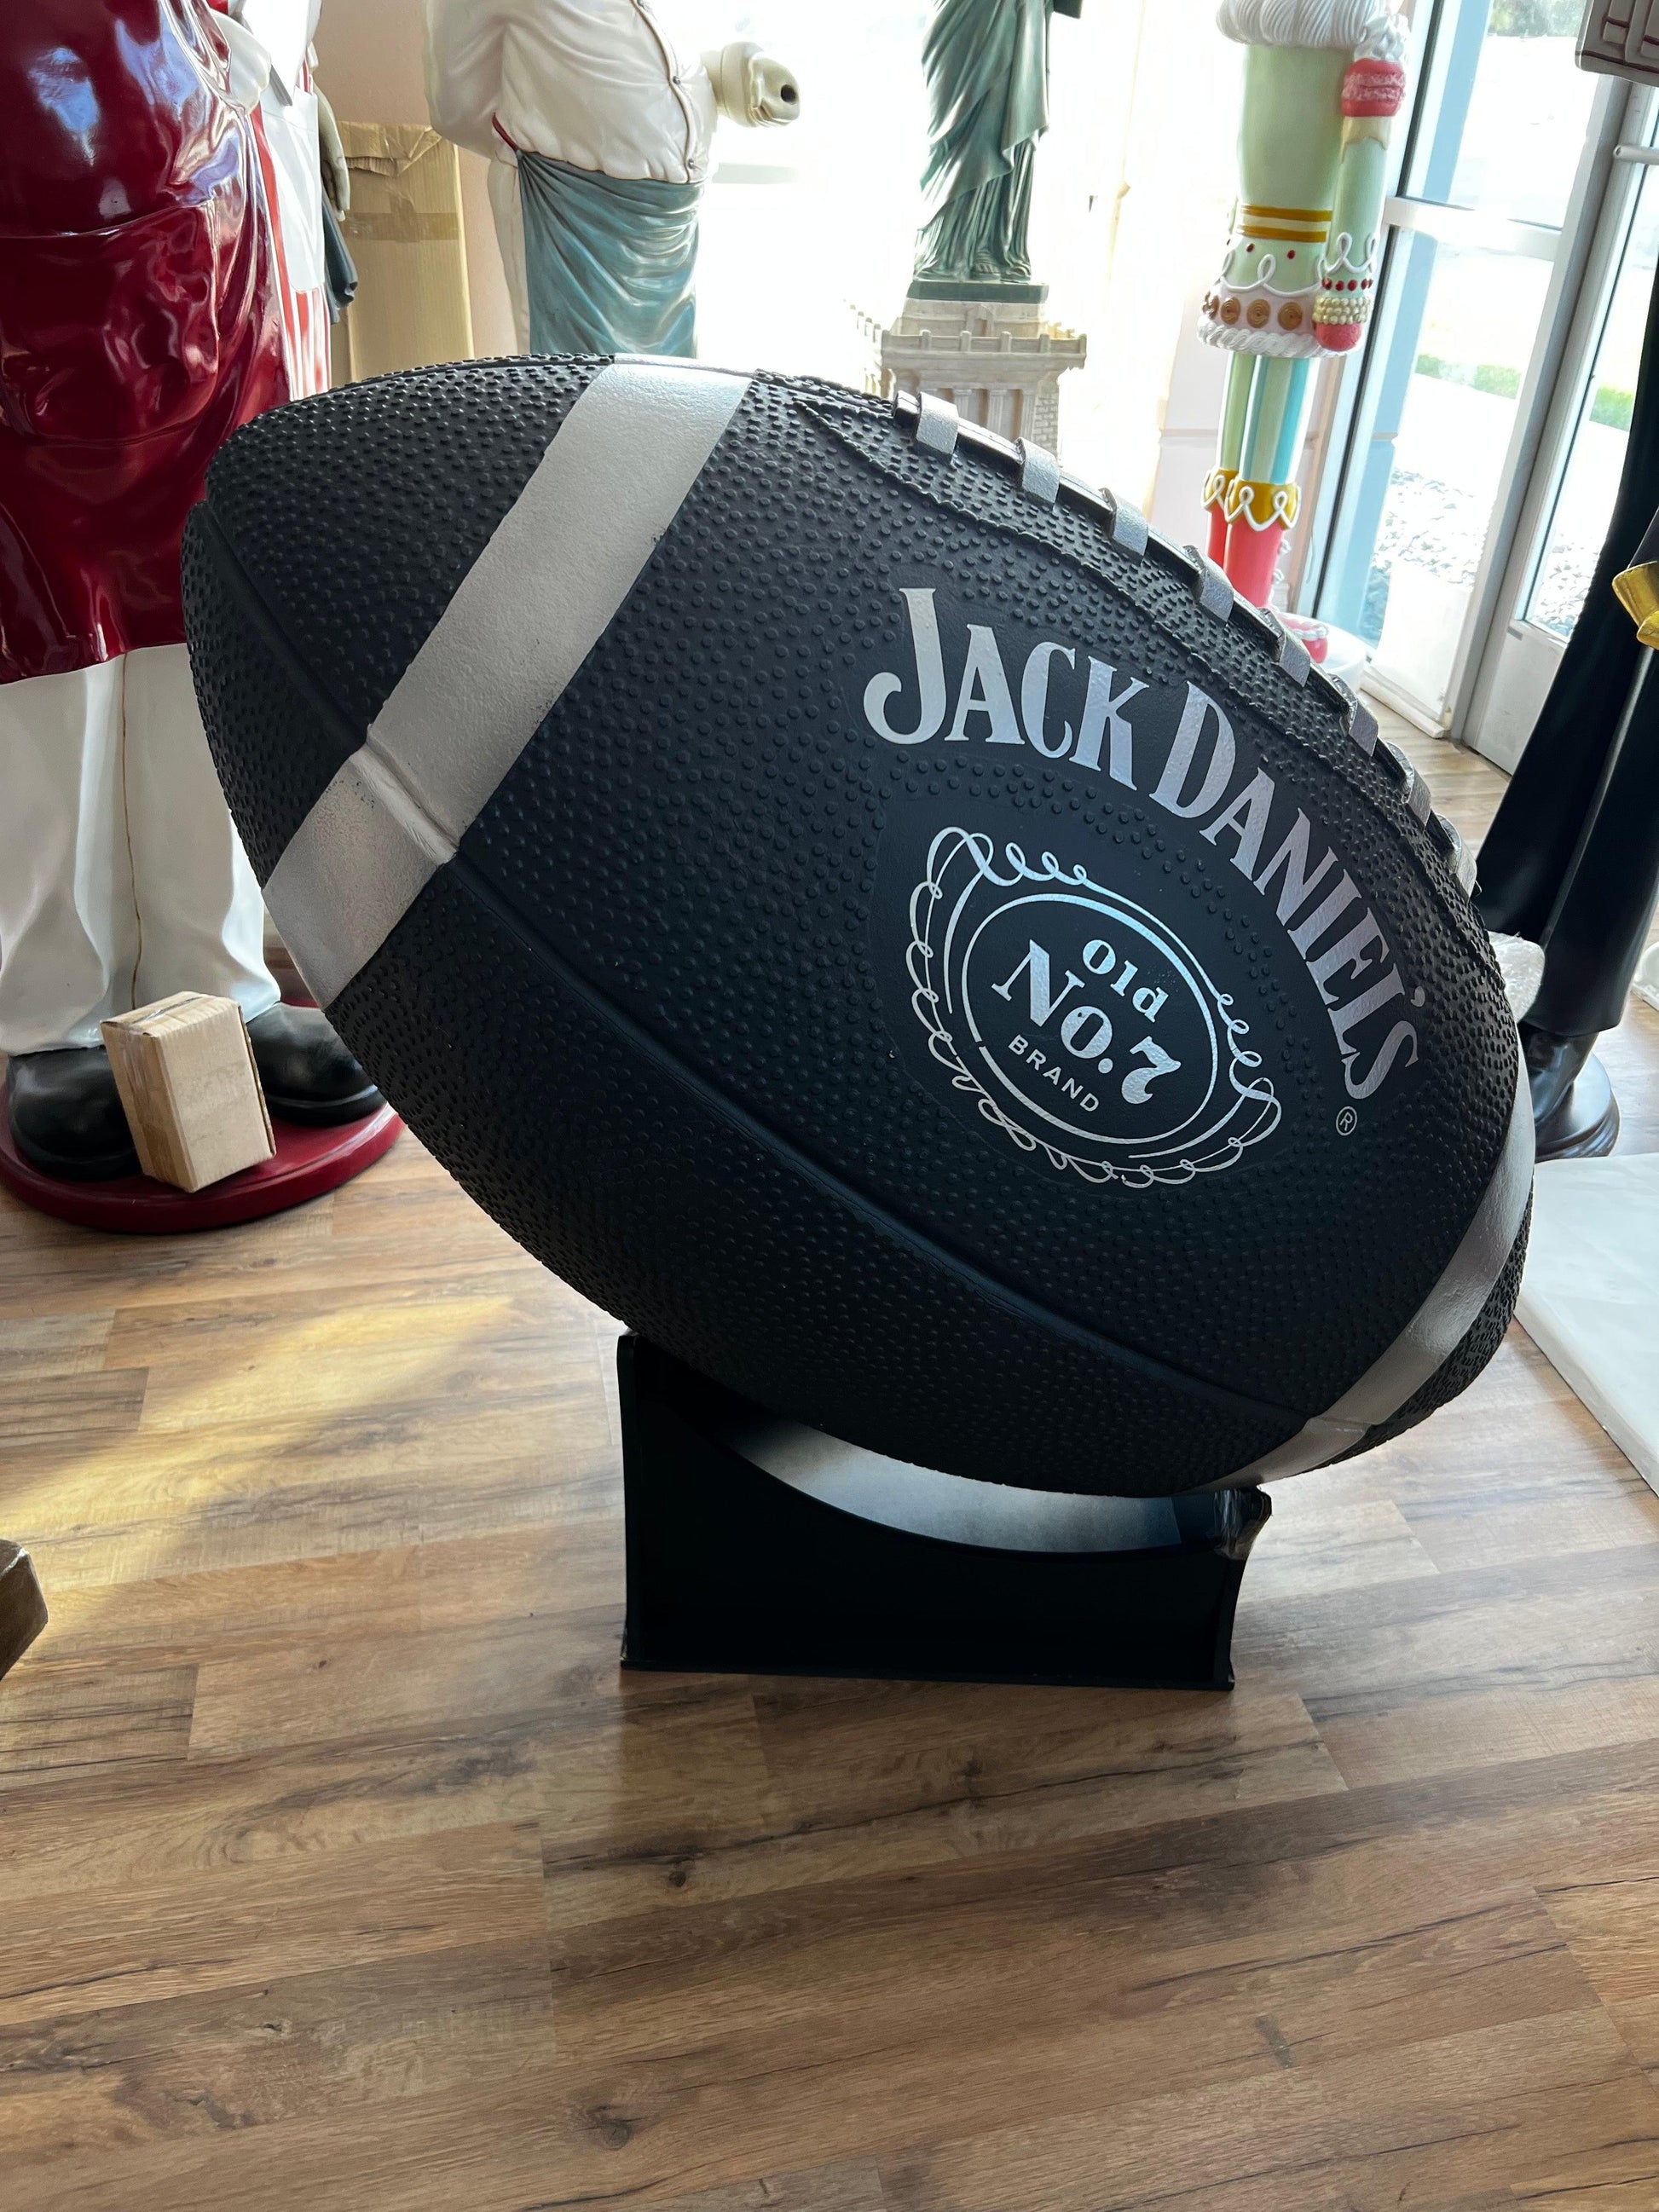 Large Jack Daniels Football Over Sized Statue - LM Treasures Prop Rentals 